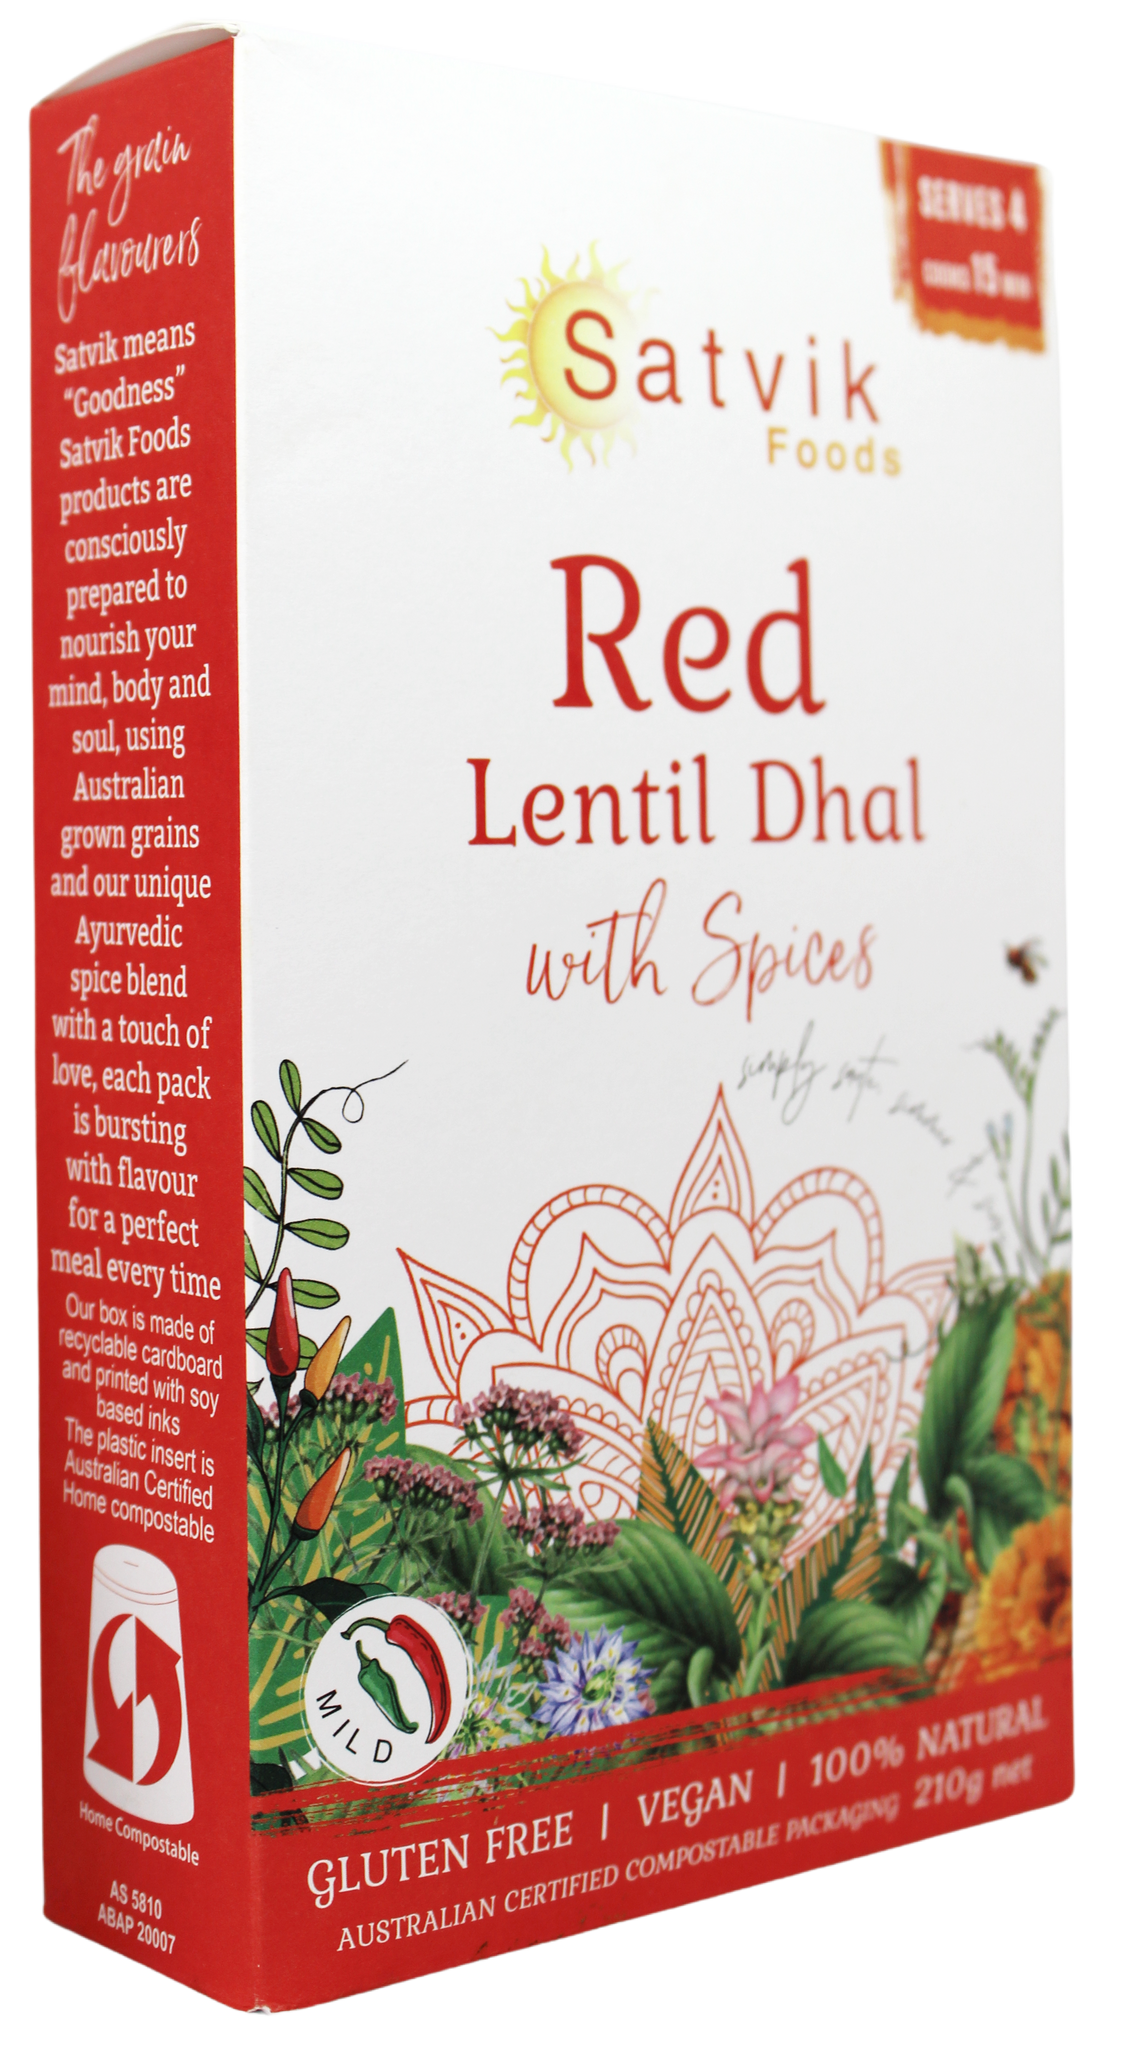 Red lentil dhal is a good source of plant based protein and fibre. Satvik Foods unique Ayurvedic spice blend enhances flavours and provides powerful health benefits, such as anti inflammatory turmeric, cumin and organic sea salt 